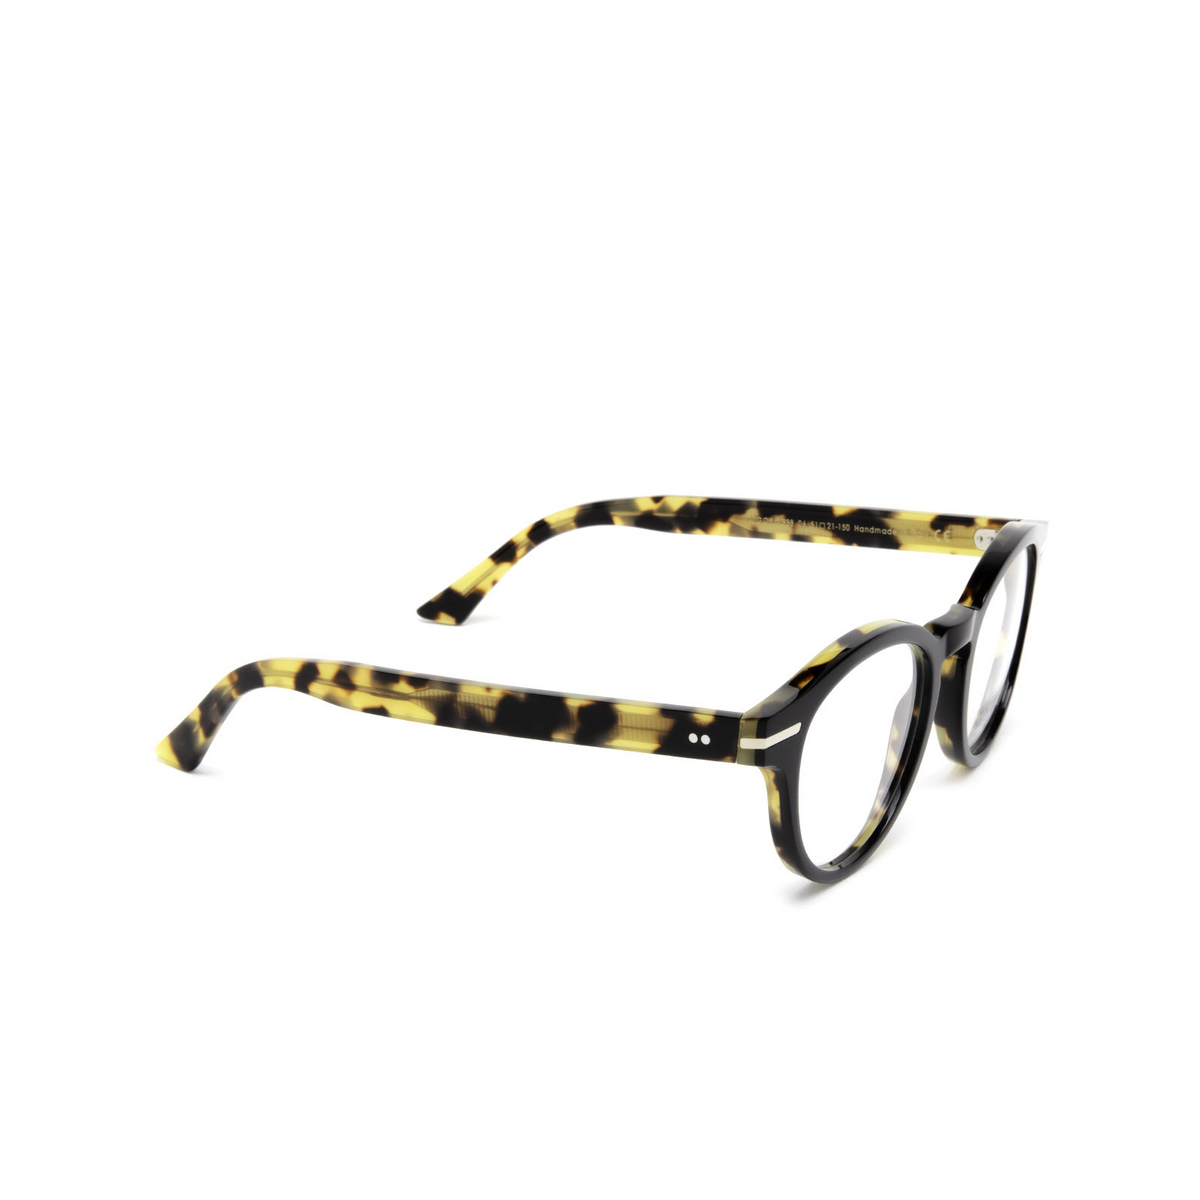 Cutler and Gross 1338 Eyeglasses 06 Black on Camo - three-quarters view